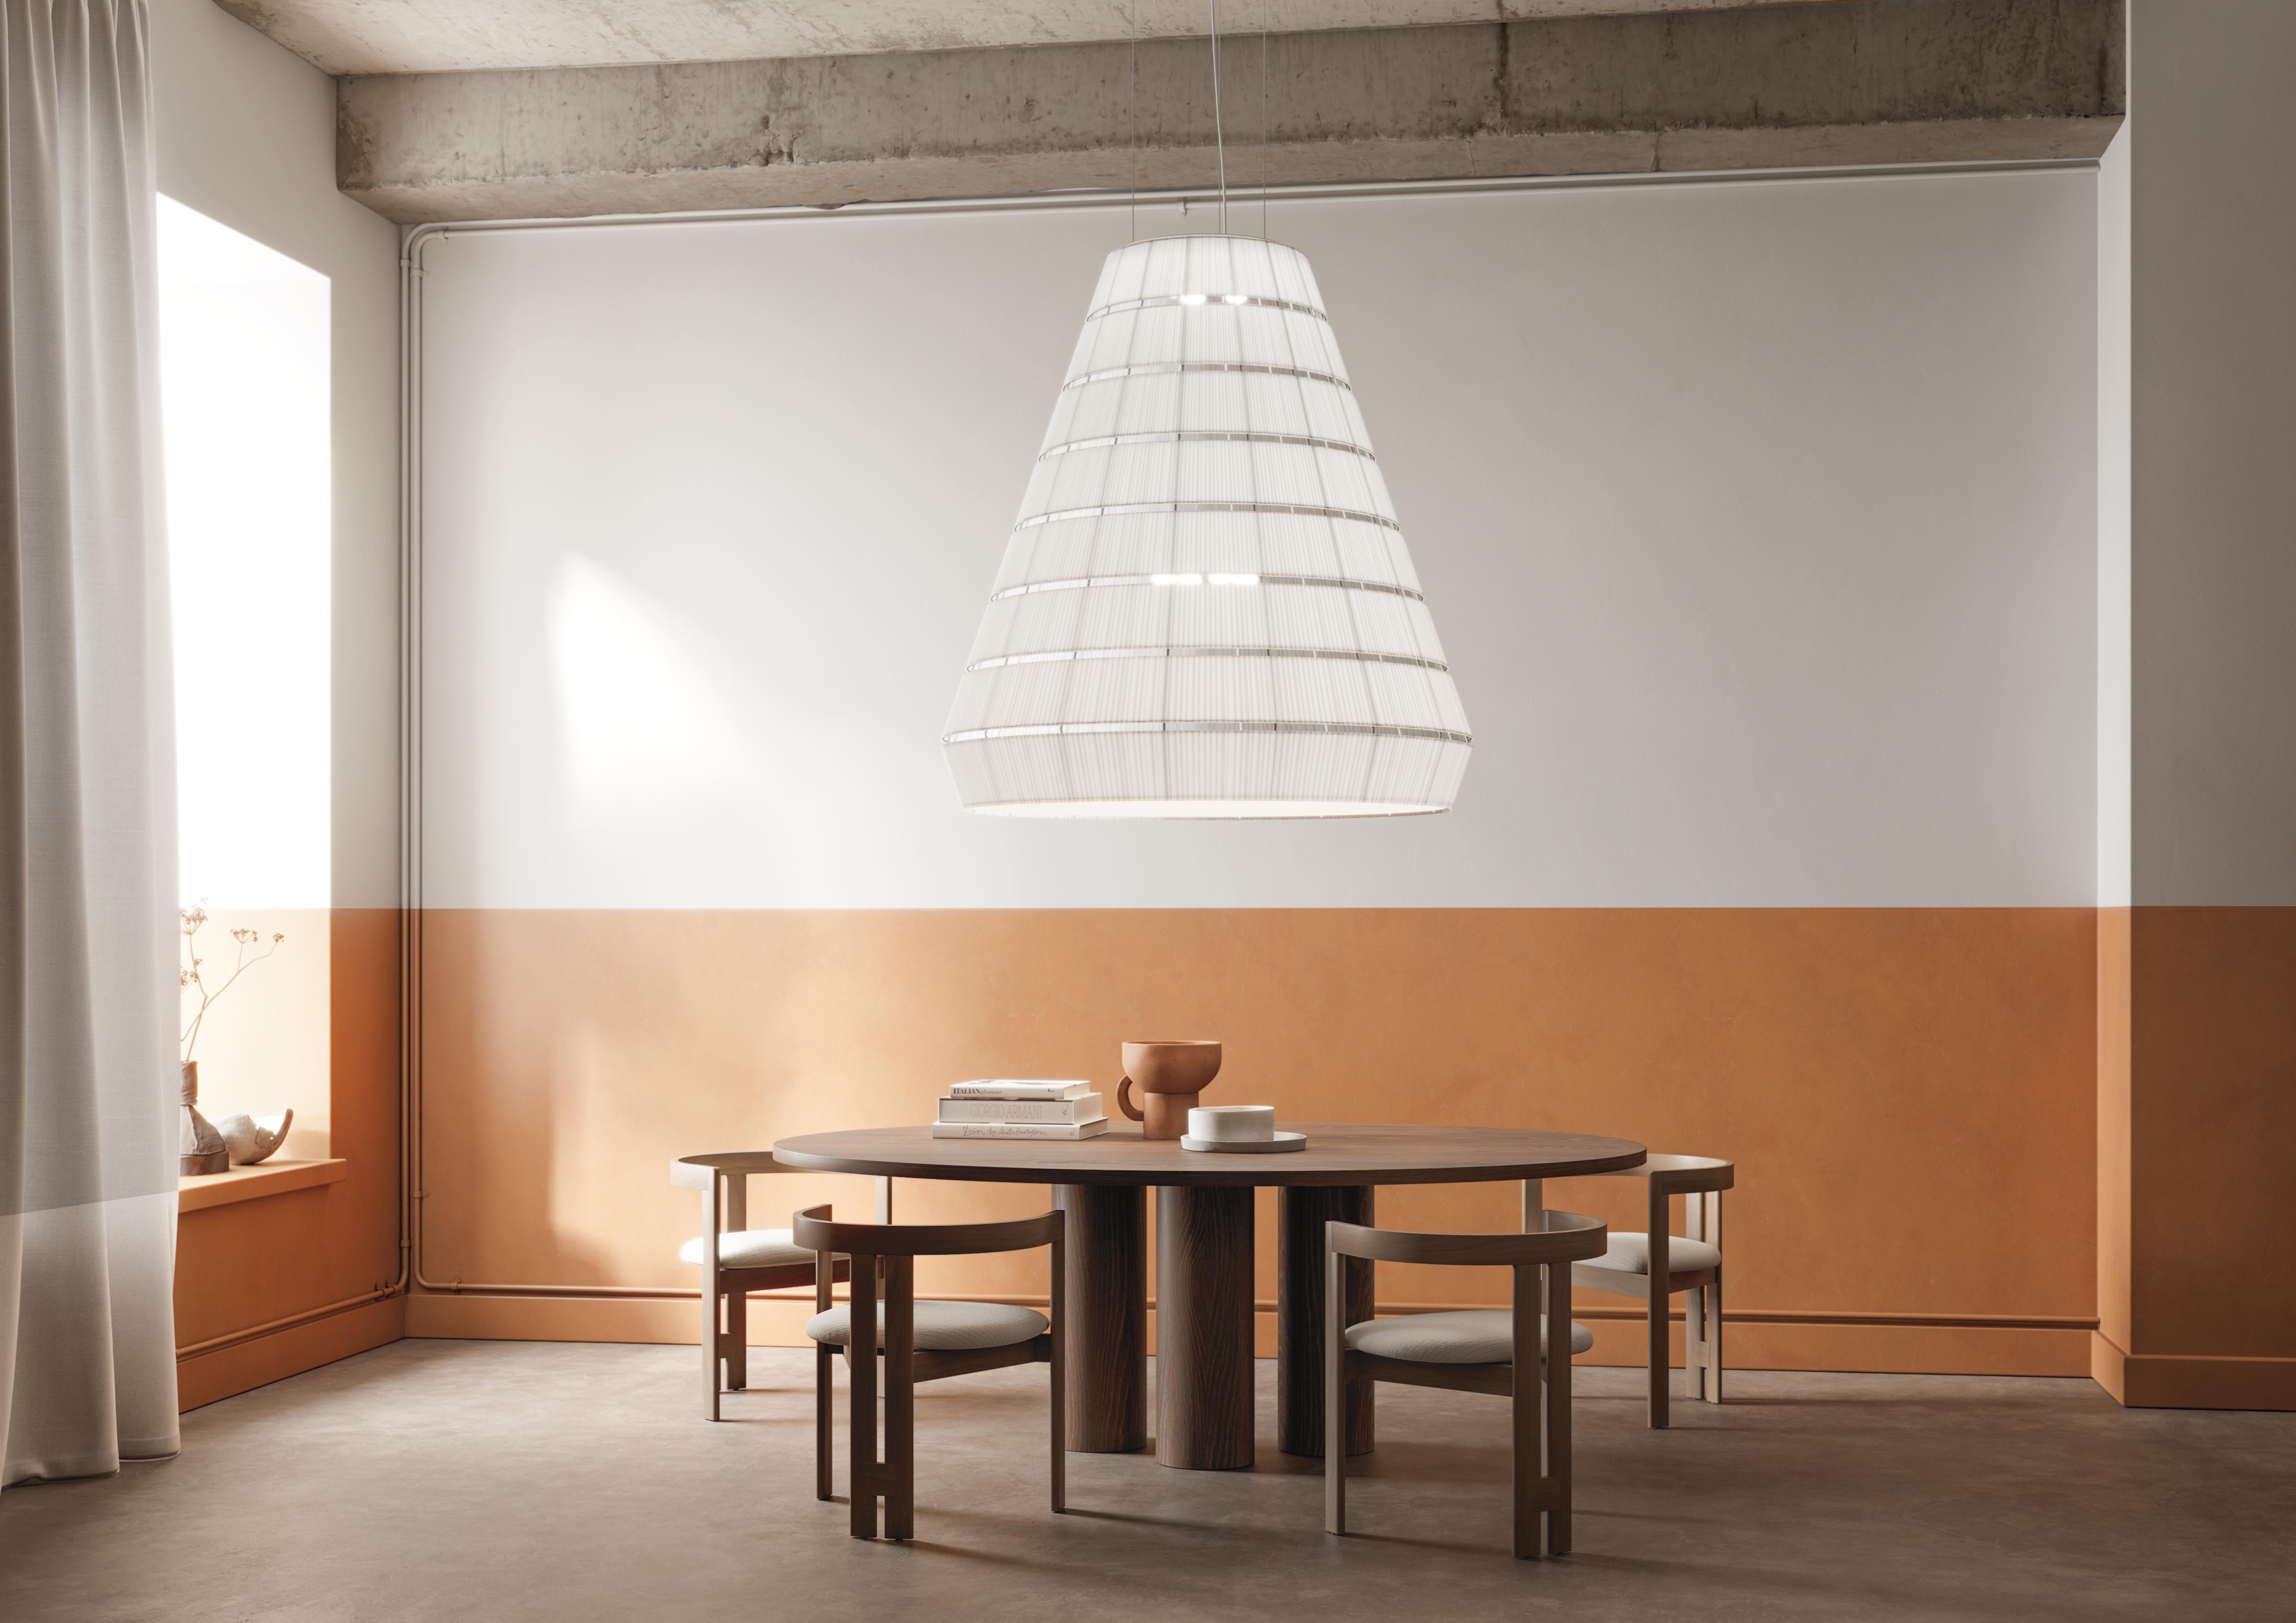 Axolight Layers Type E Pendant Lamp in White Steel by Vanessa Vivian

Layers is a collection of suspension lamps with a strong sculptural presence, obtained through combinations of different geometric shapes. Its layered system is modular, which